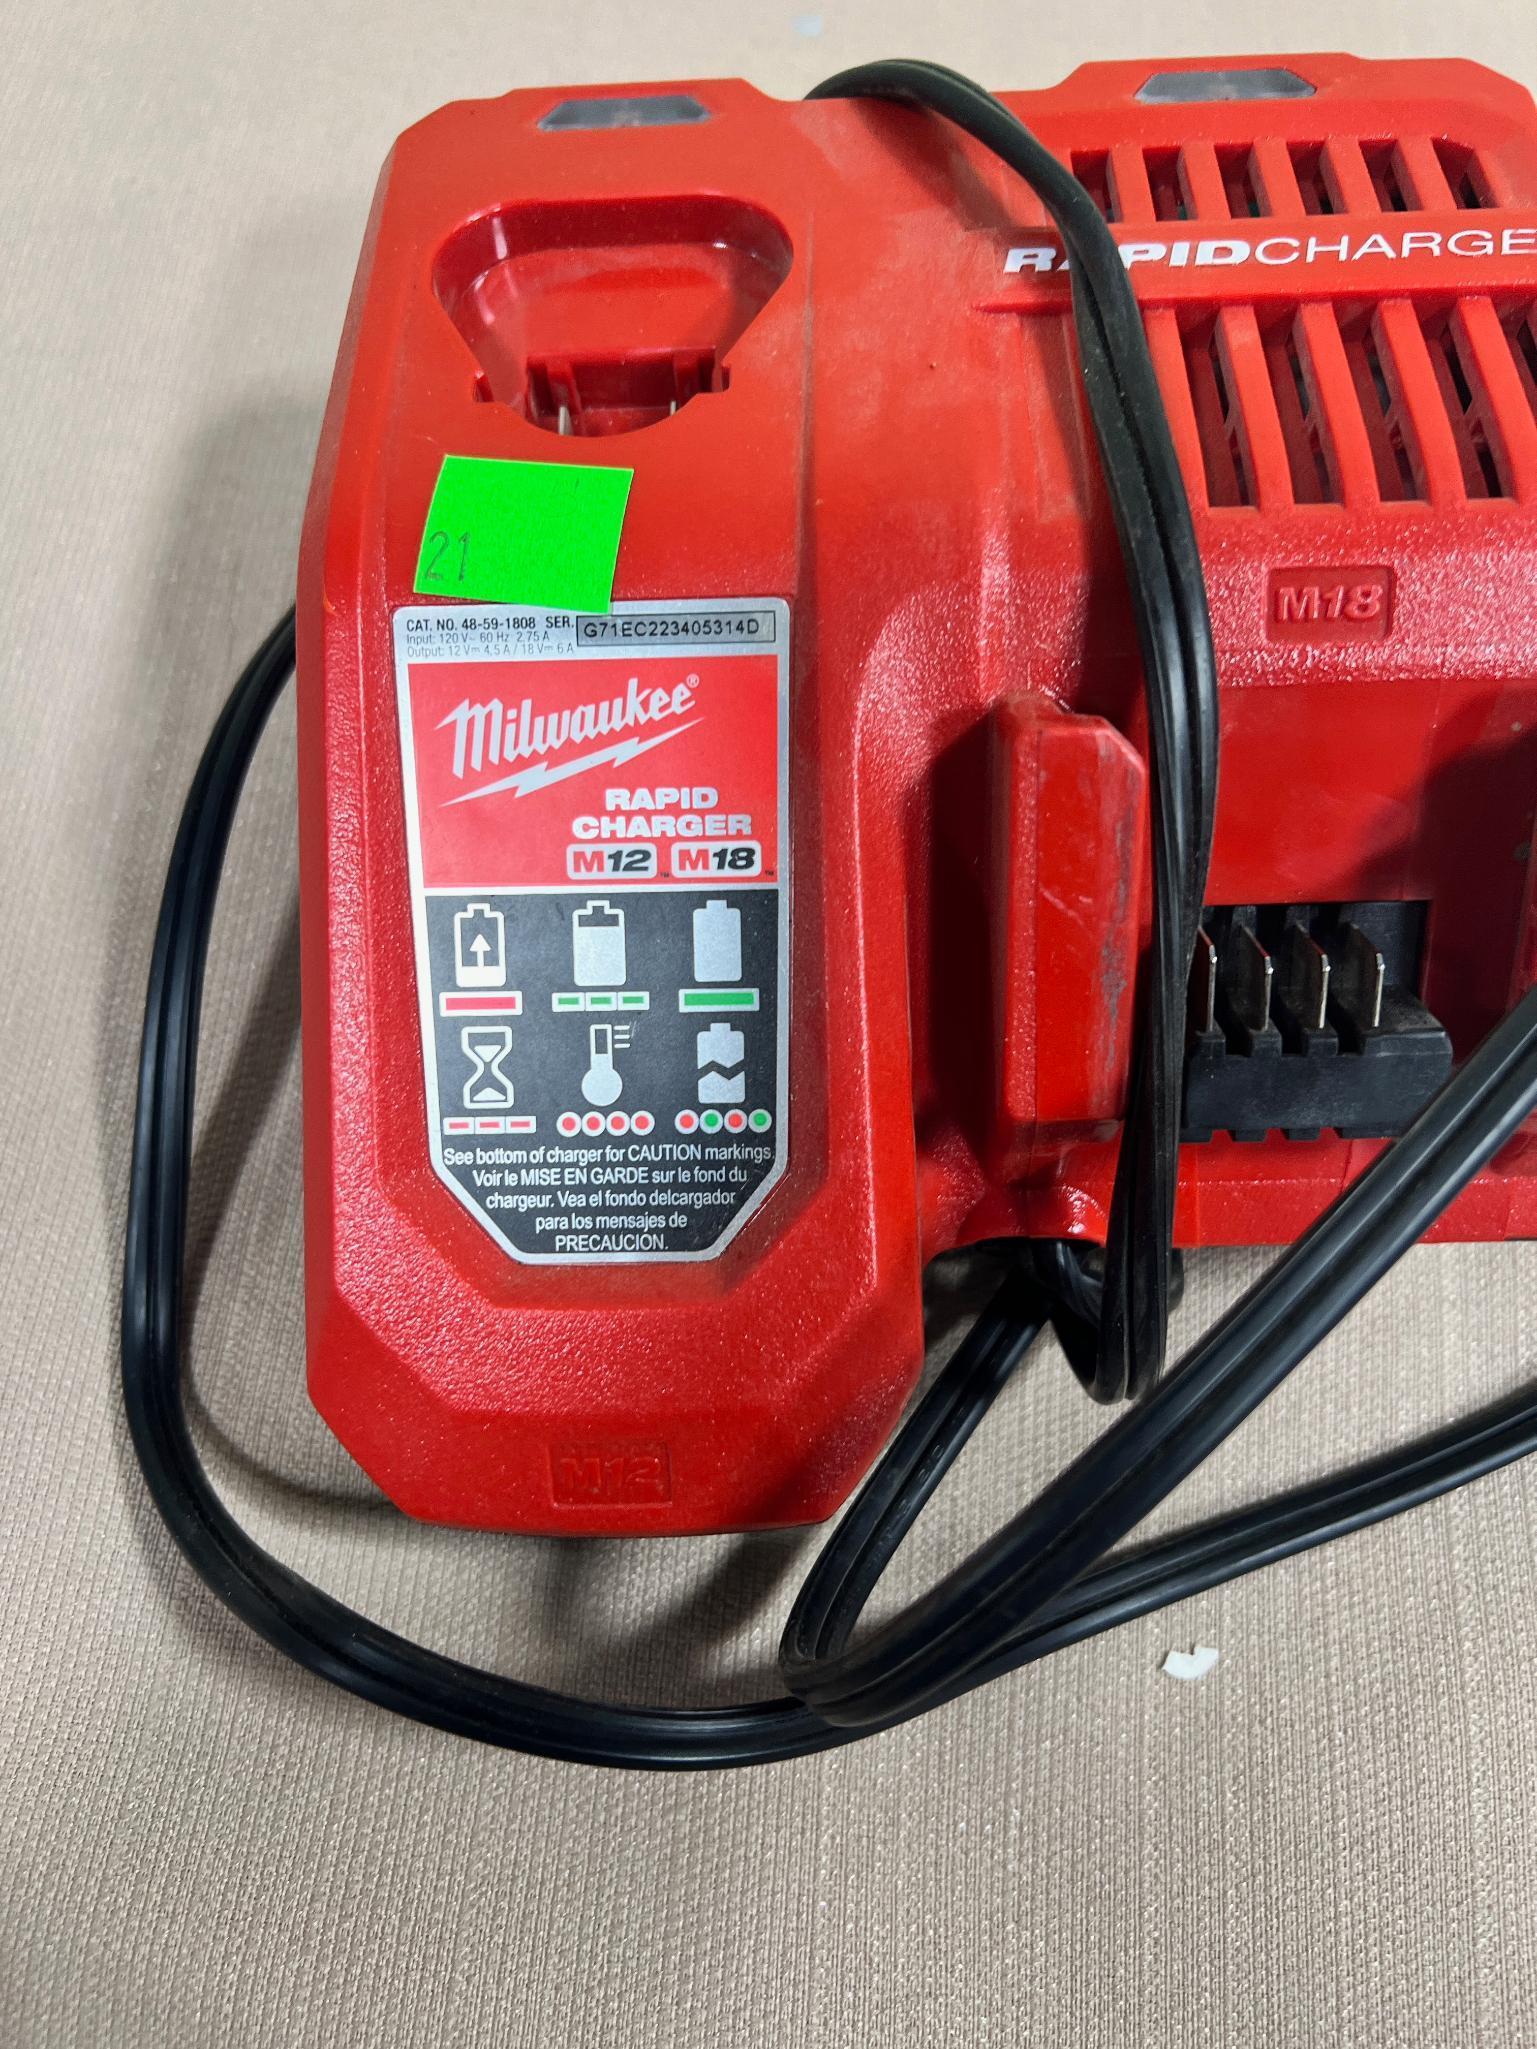 Milwaukee No. 48-59-1808 M12 and M18 Dual Rapid Charger